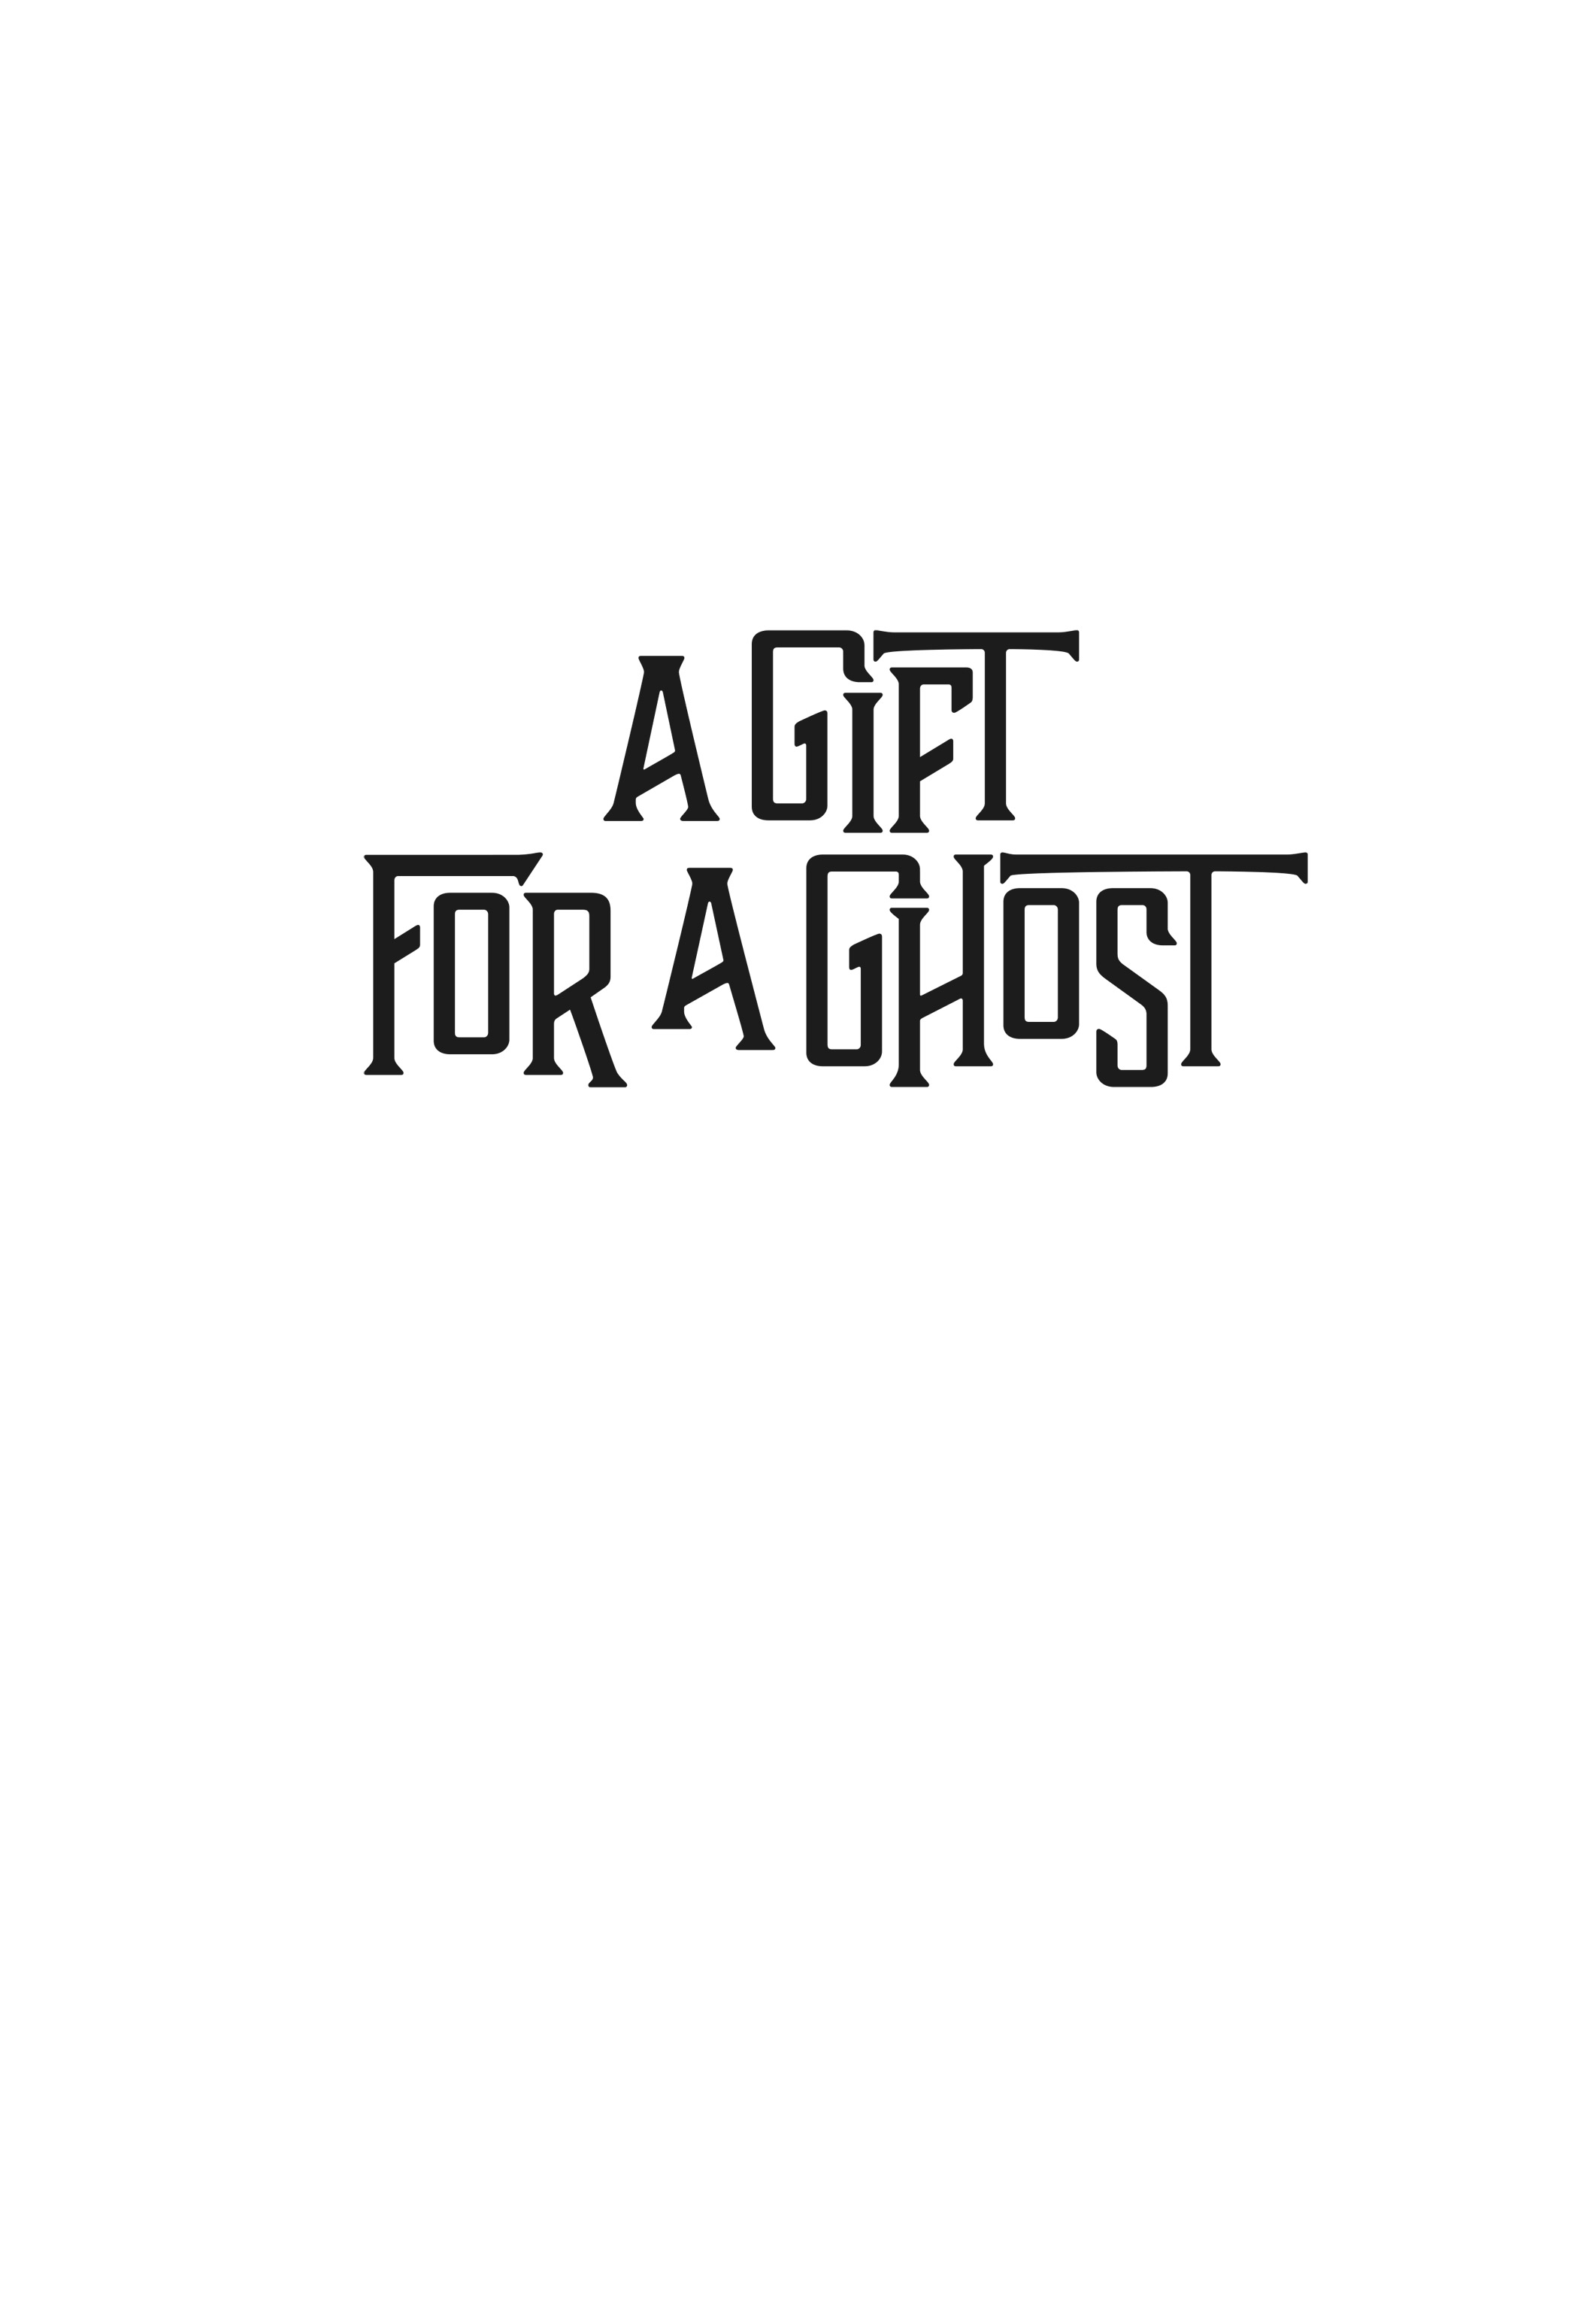 Read online A Gift for a Ghost comic -  Issue # TPB - 5